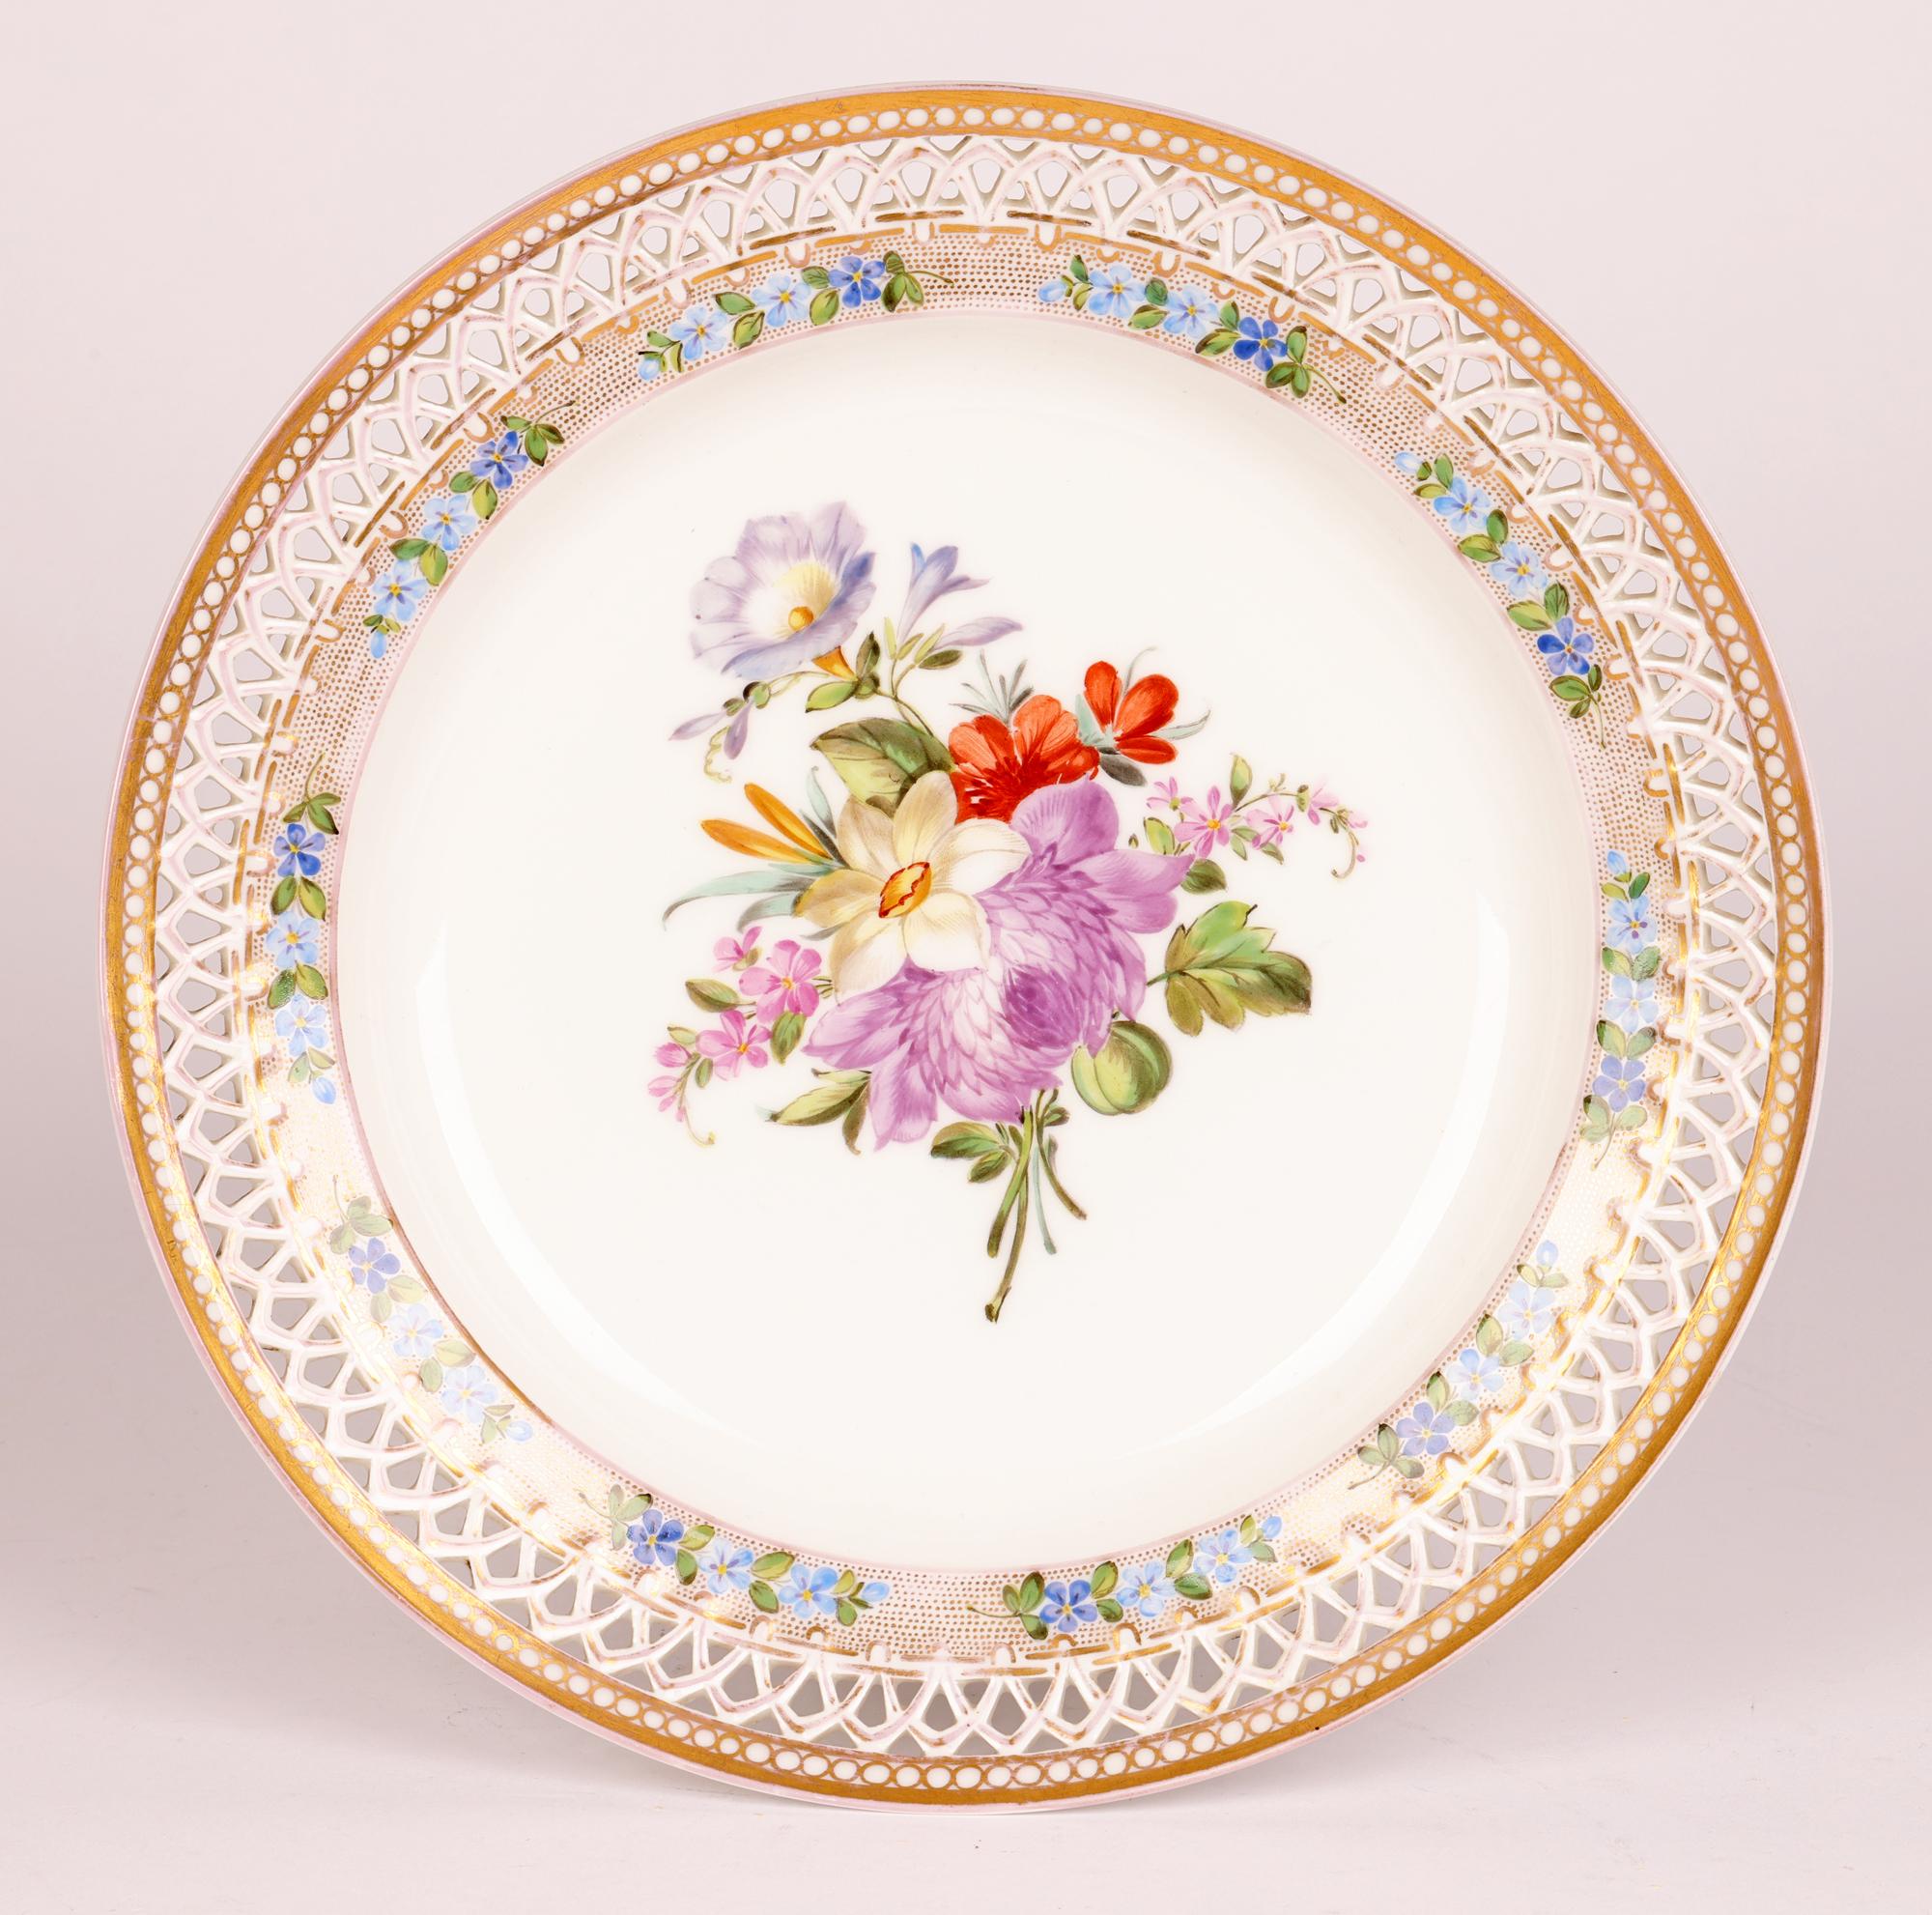 A very finely made German porcelain cabinet plate with a pierced patterned and rim and hand painted with floral designs made by the renowned Royal Porcelain Factory, Berlin around 1890. 

The factory in Berlin is one of the most renowned producers